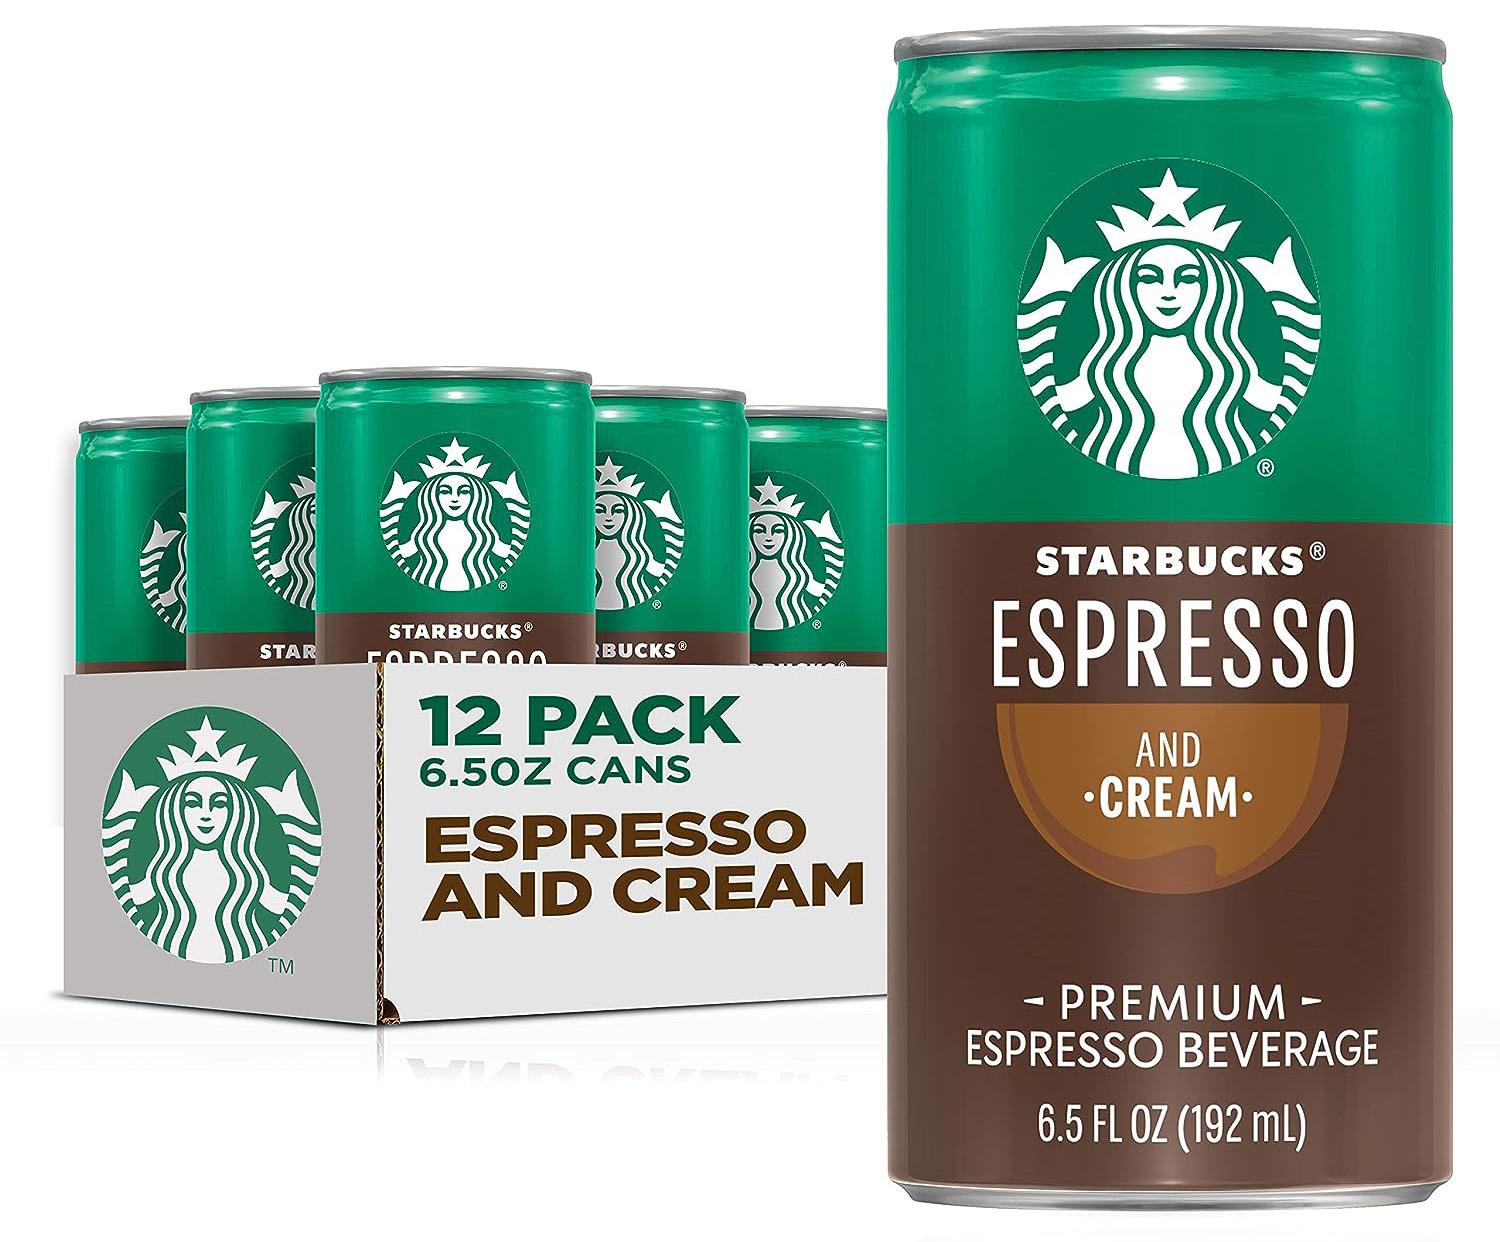 Starbucks Ready to Drink Coffee Espresso and Cream 12 Pack for $14.05 Shipped